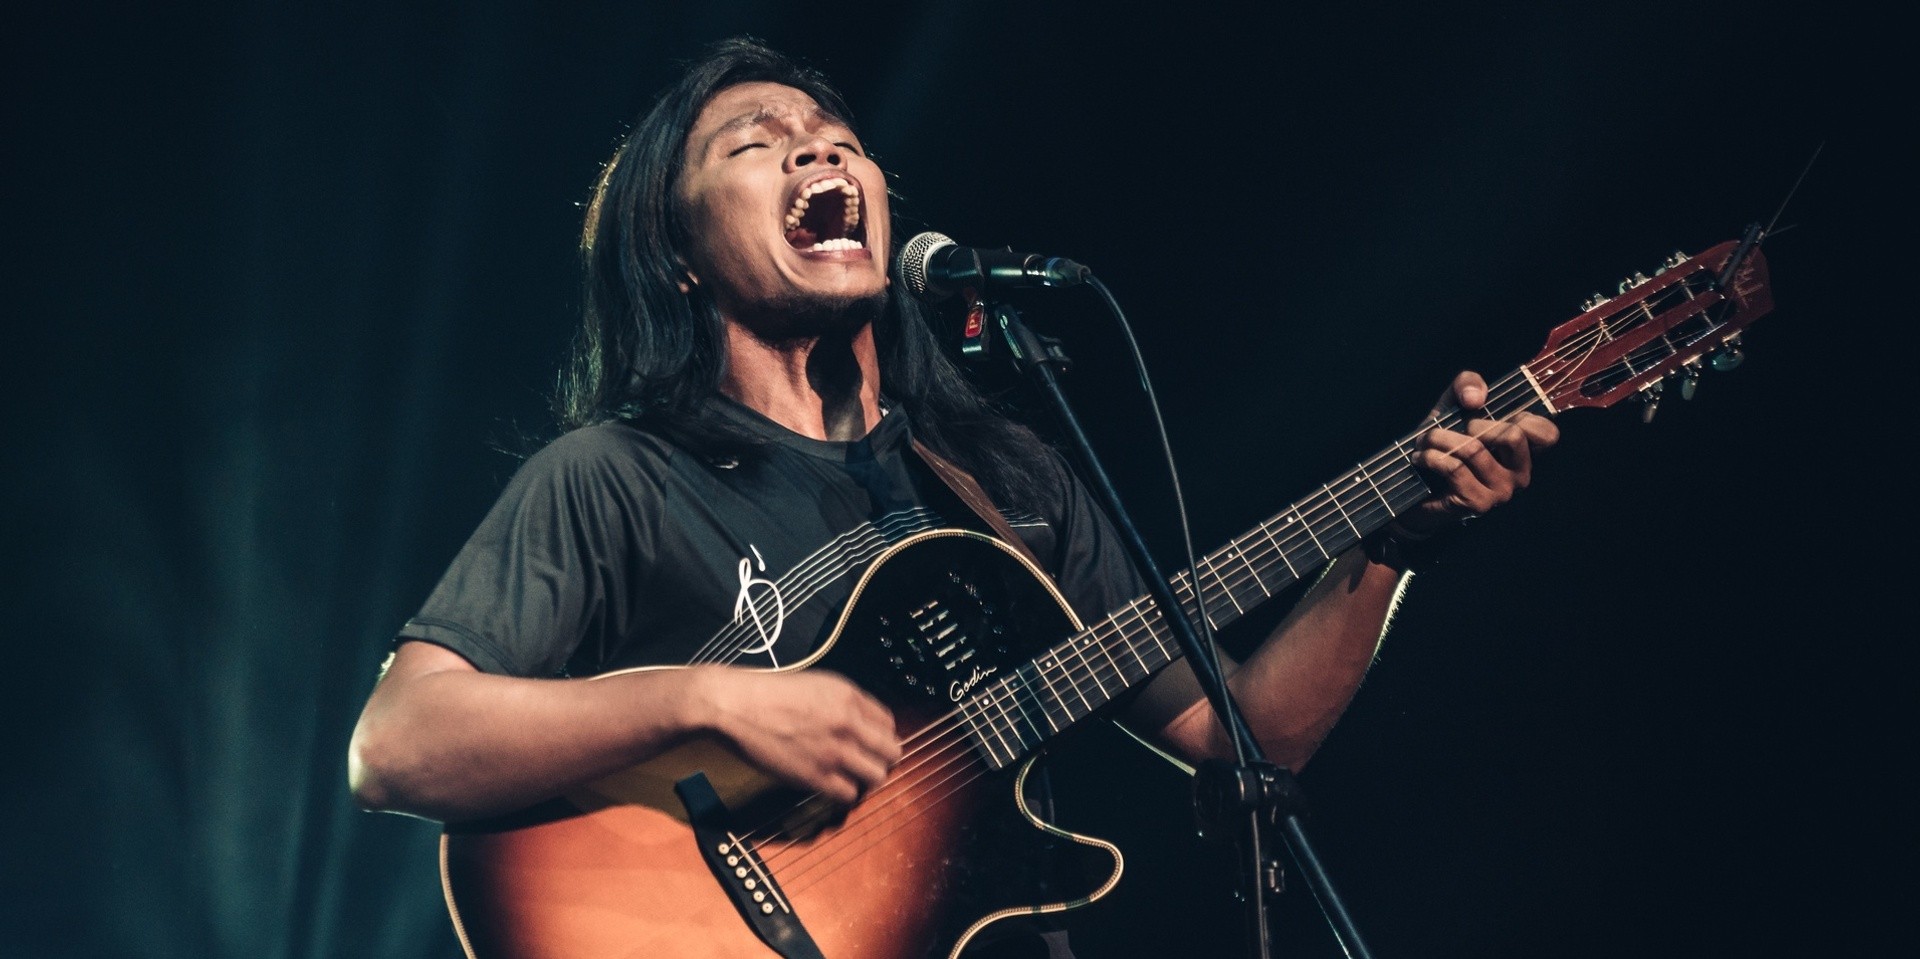 Bullet Dumas pens inspiring song for music industry workers in the Philippines – listen